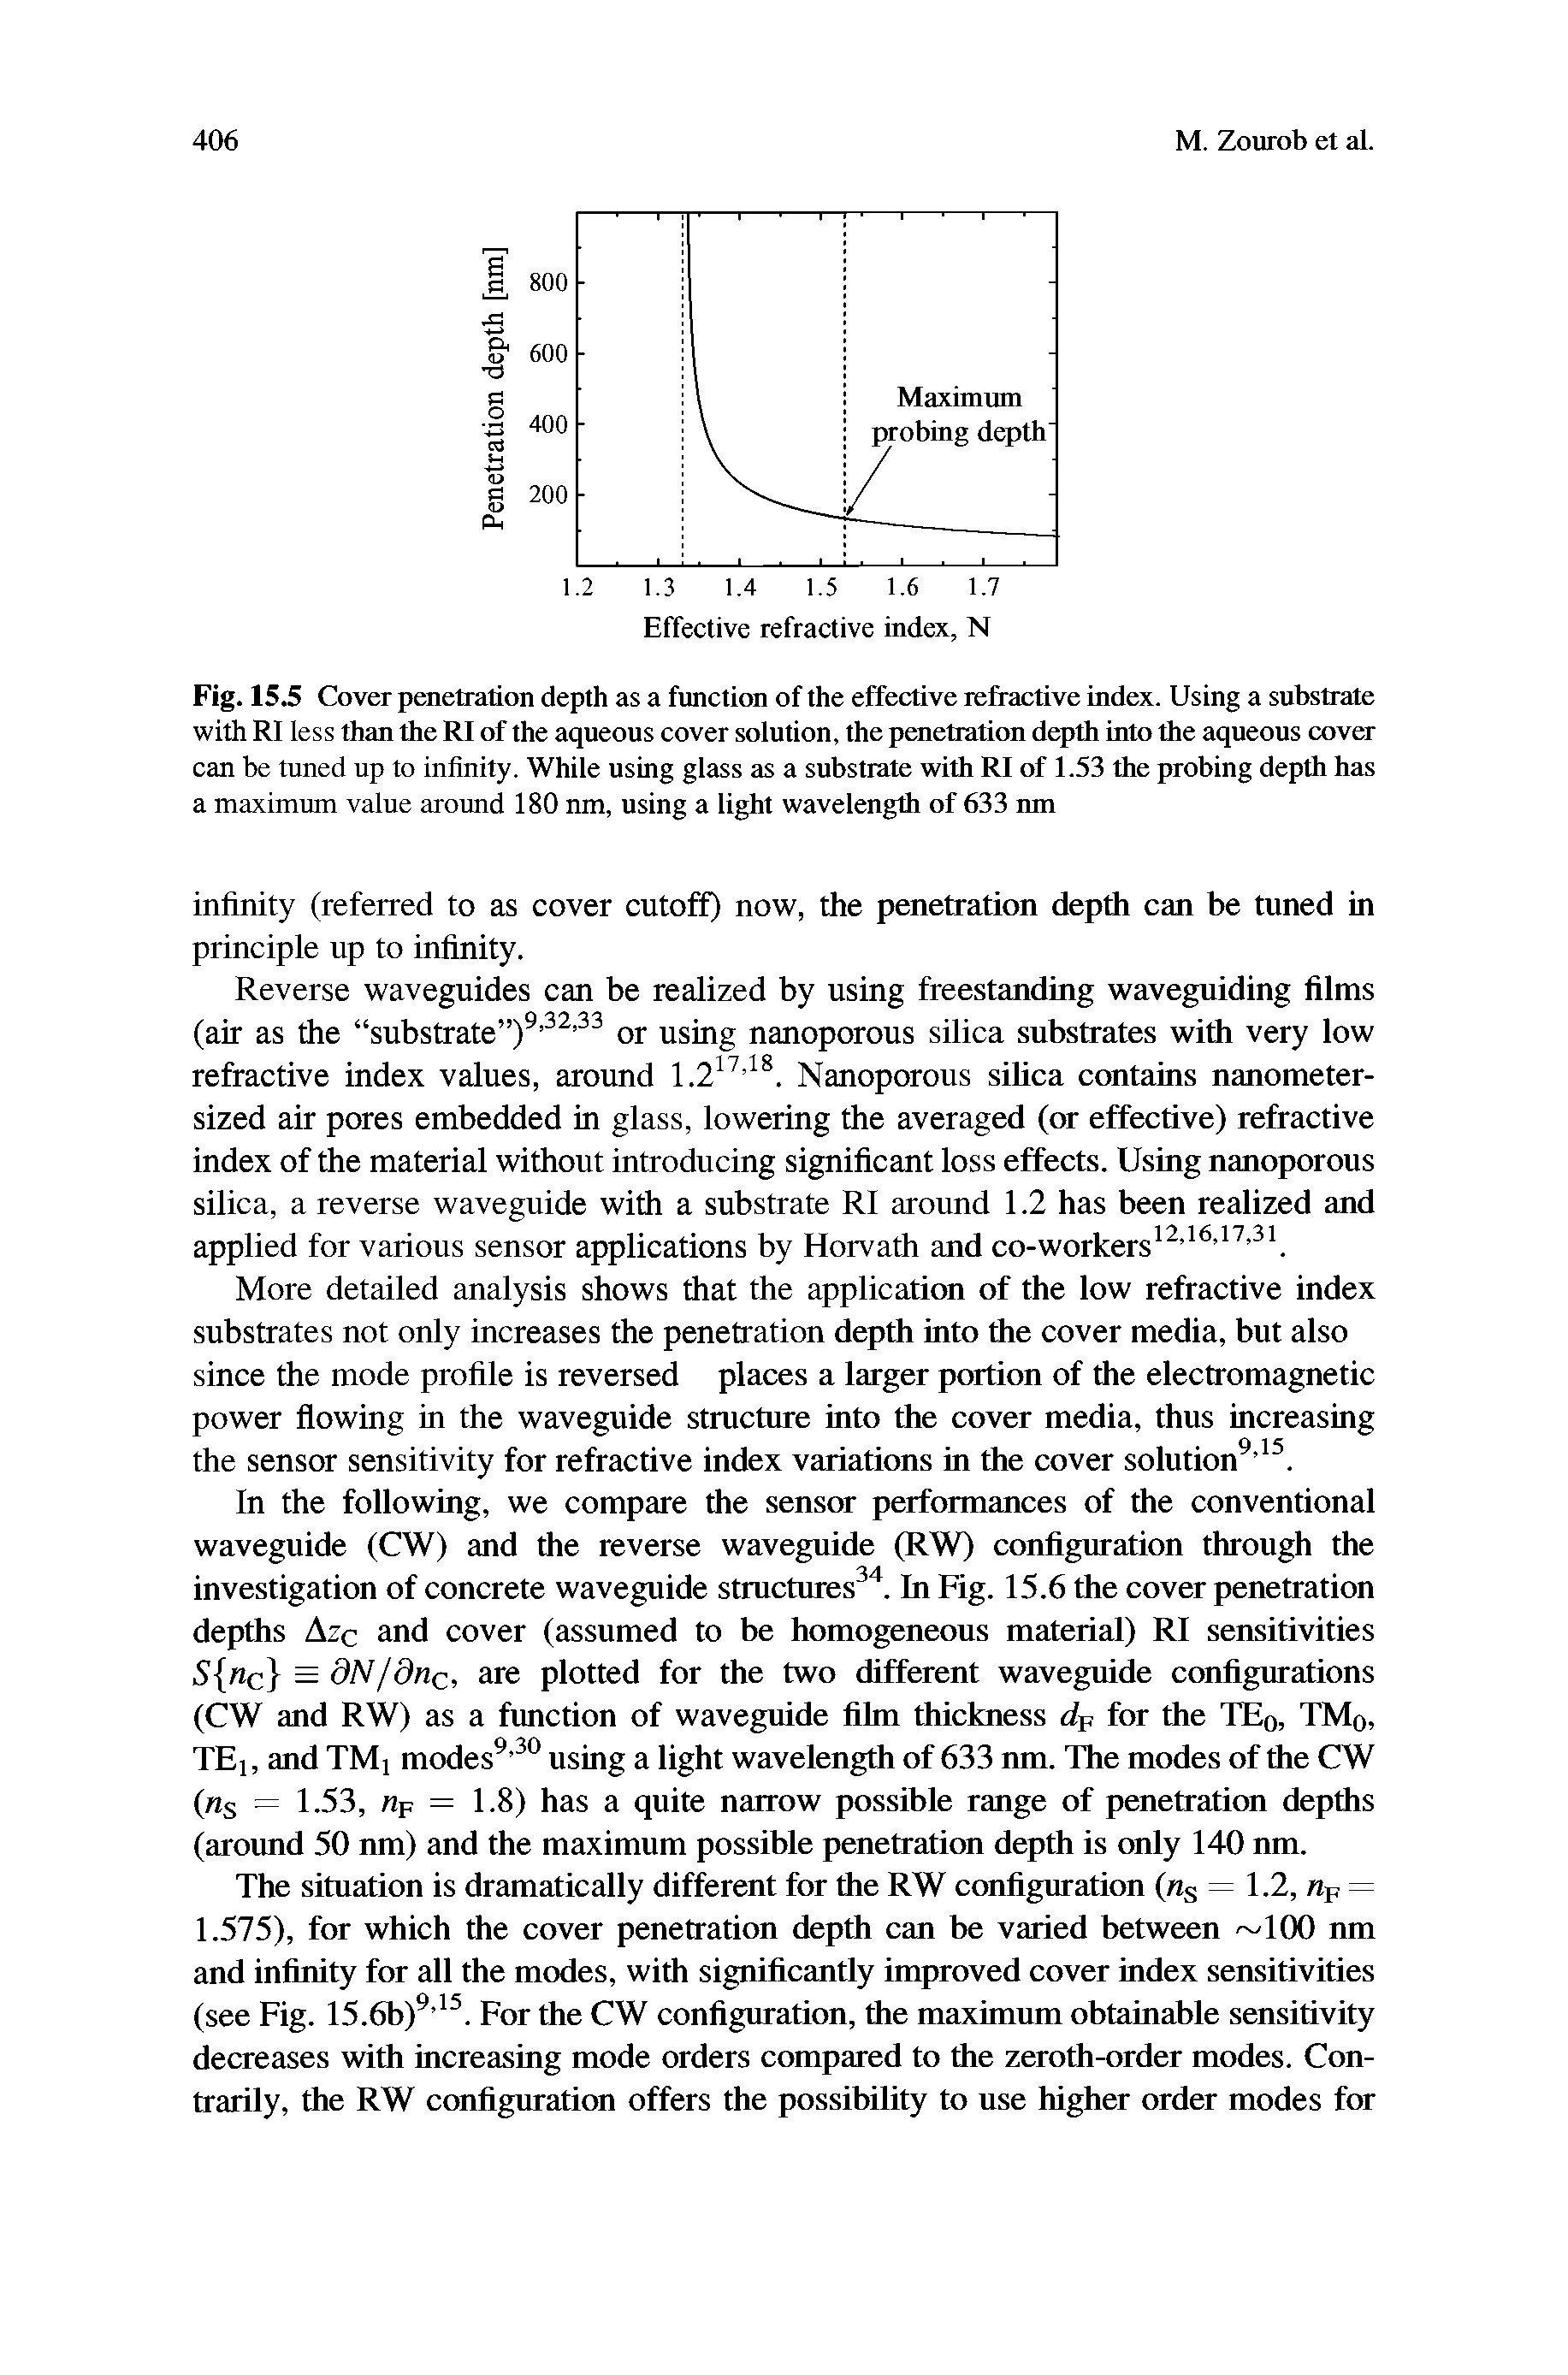 Fig. 15.5 Cover penetration depth as a function of the effective refractive index. Using a substrate with RI less than the RI of the aqueous cover solution, the penetration depth into the aqueous cover can be tuned up to infinity. While using glass as a substrate with RI of 1.53 the probing depth has a maximum value around 180 nm, using a light wavelength of 633 nm...